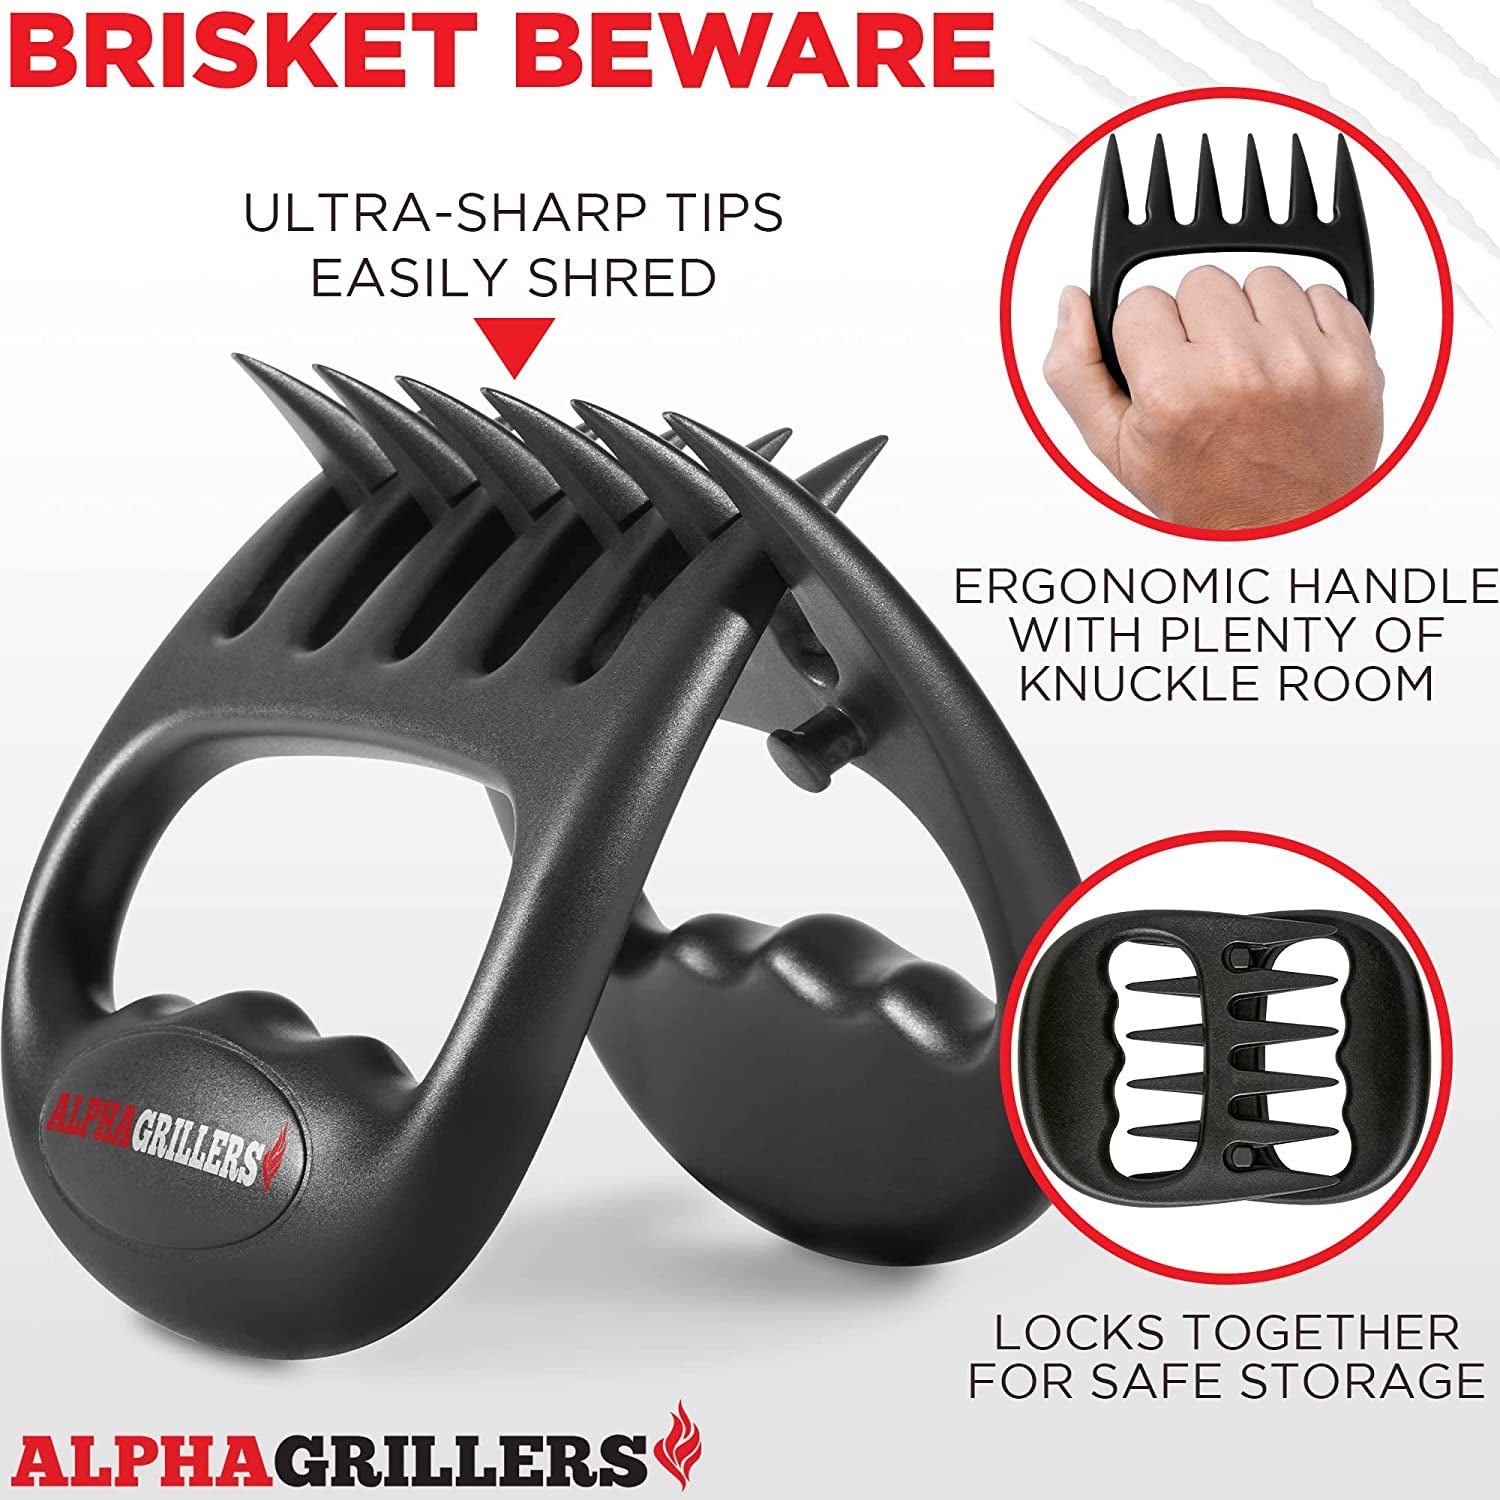 Meat Shredder Claws - Barbecue Smoker Accessories Bear Claws for Shredding Meat BBQ Pulled Pork, Chicken in Kitchen, Grill